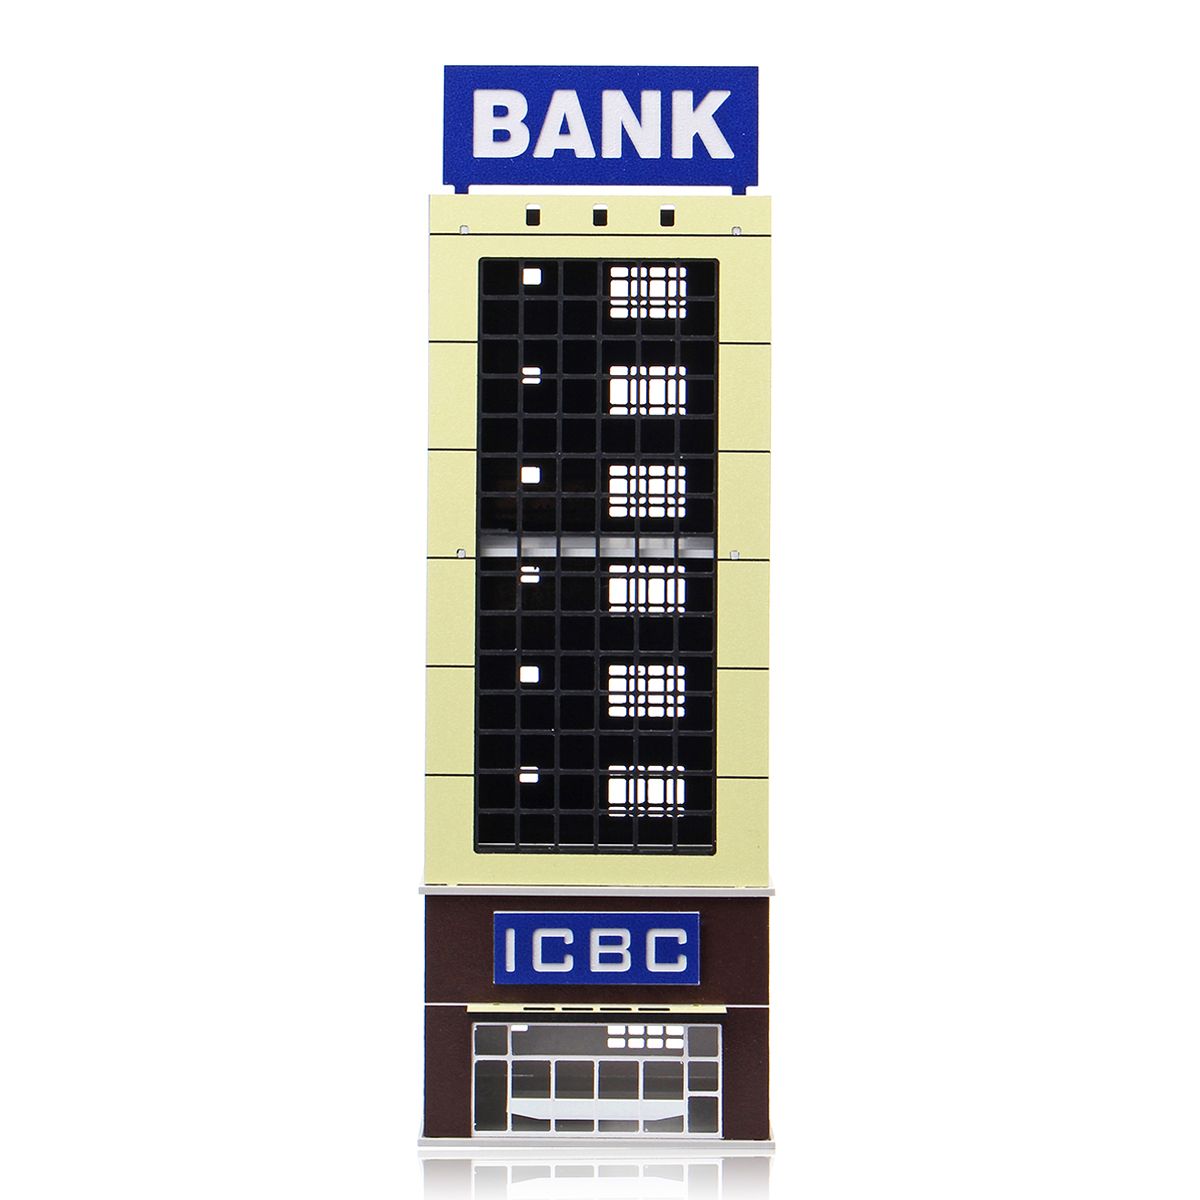 1150-Outland-Model-Modern-Building-Bank-N-Scale-FOR-GUNDAM-Gifts-1372826